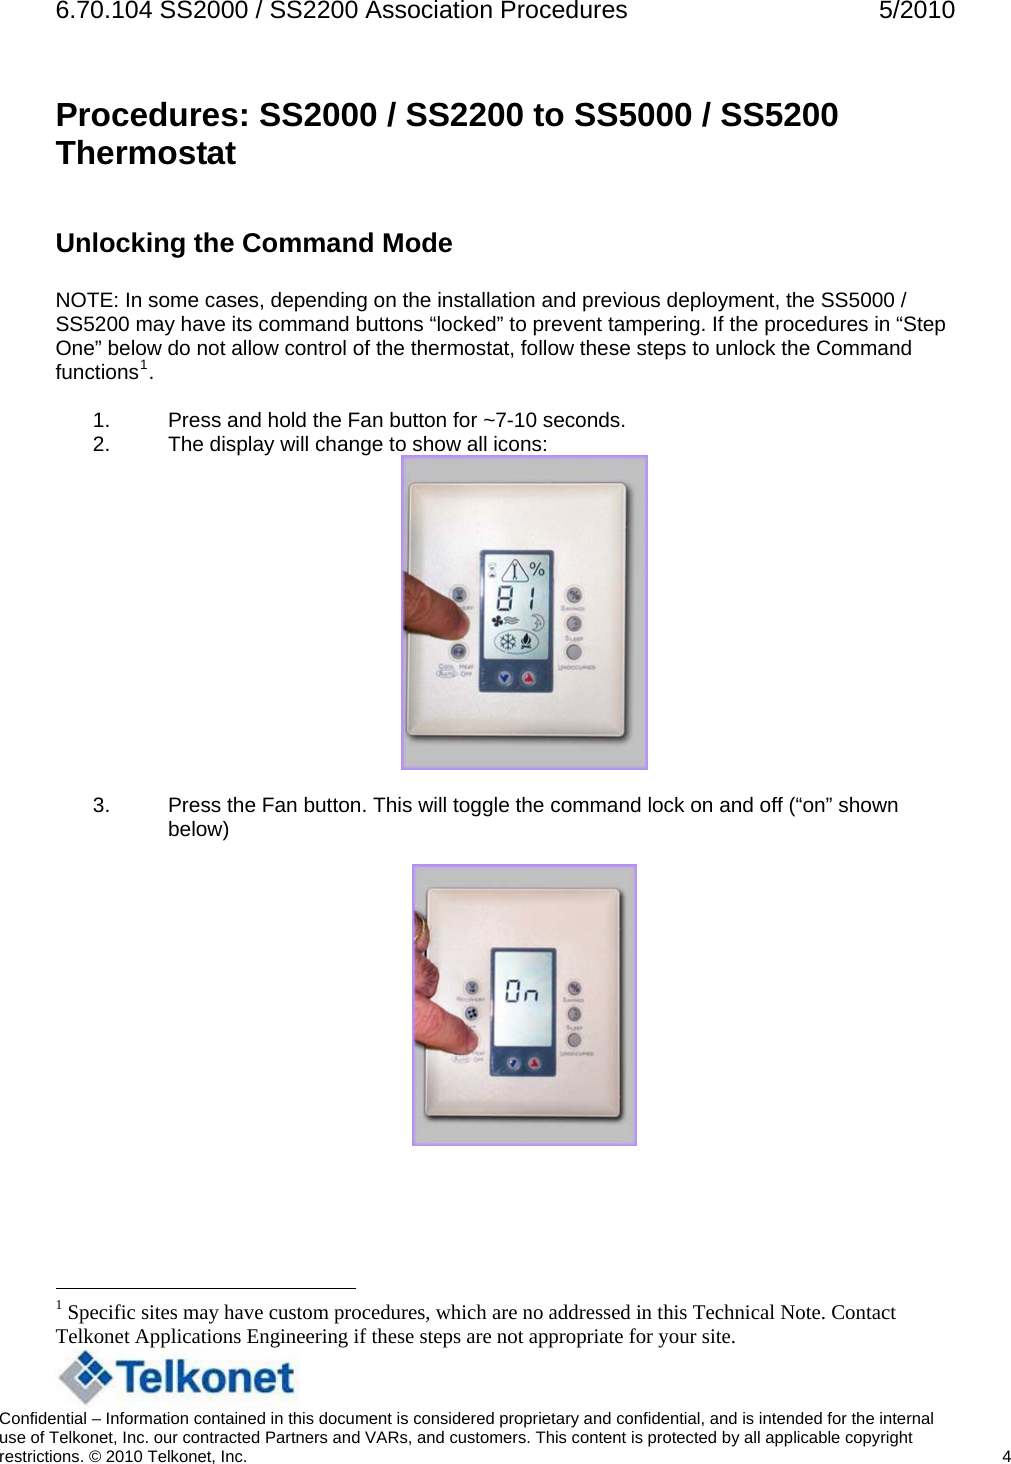 6.70.104 SS2000 / SS2200 Association Procedures  5/2010 Procedures: SS2000 / SS2200 to SS5000 / SS5200 Thermostat  Unlocking the Command Mode  NOTE: In some cases, depending on the installation and previous deployment, the SS5000 / SS5200 may have its command buttons “locked” to prevent tampering. If the procedures in “Step One” below do not allow control of the thermostat, follow these steps to unlock the Command functions1.  1.  Press and hold the Fan button for ~7-10 seconds. 2.  The display will change to show all icons:   3.  Press the Fan button. This will toggle the command lock on and off (“on” shown below)                                                     1 Specific sites may have custom procedures, which are no addressed in this Technical Note. Contact Telkonet Applications Engineering if these steps are not appropriate for your site.   Confidential – Information contained in this document is considered proprietary and confidential, and is intended for the internal use of Telkonet, Inc. our contracted Partners and VARs, and customers. This content is protected by all applicable copyright restrictions. © 2010 Telkonet, Inc.    4  